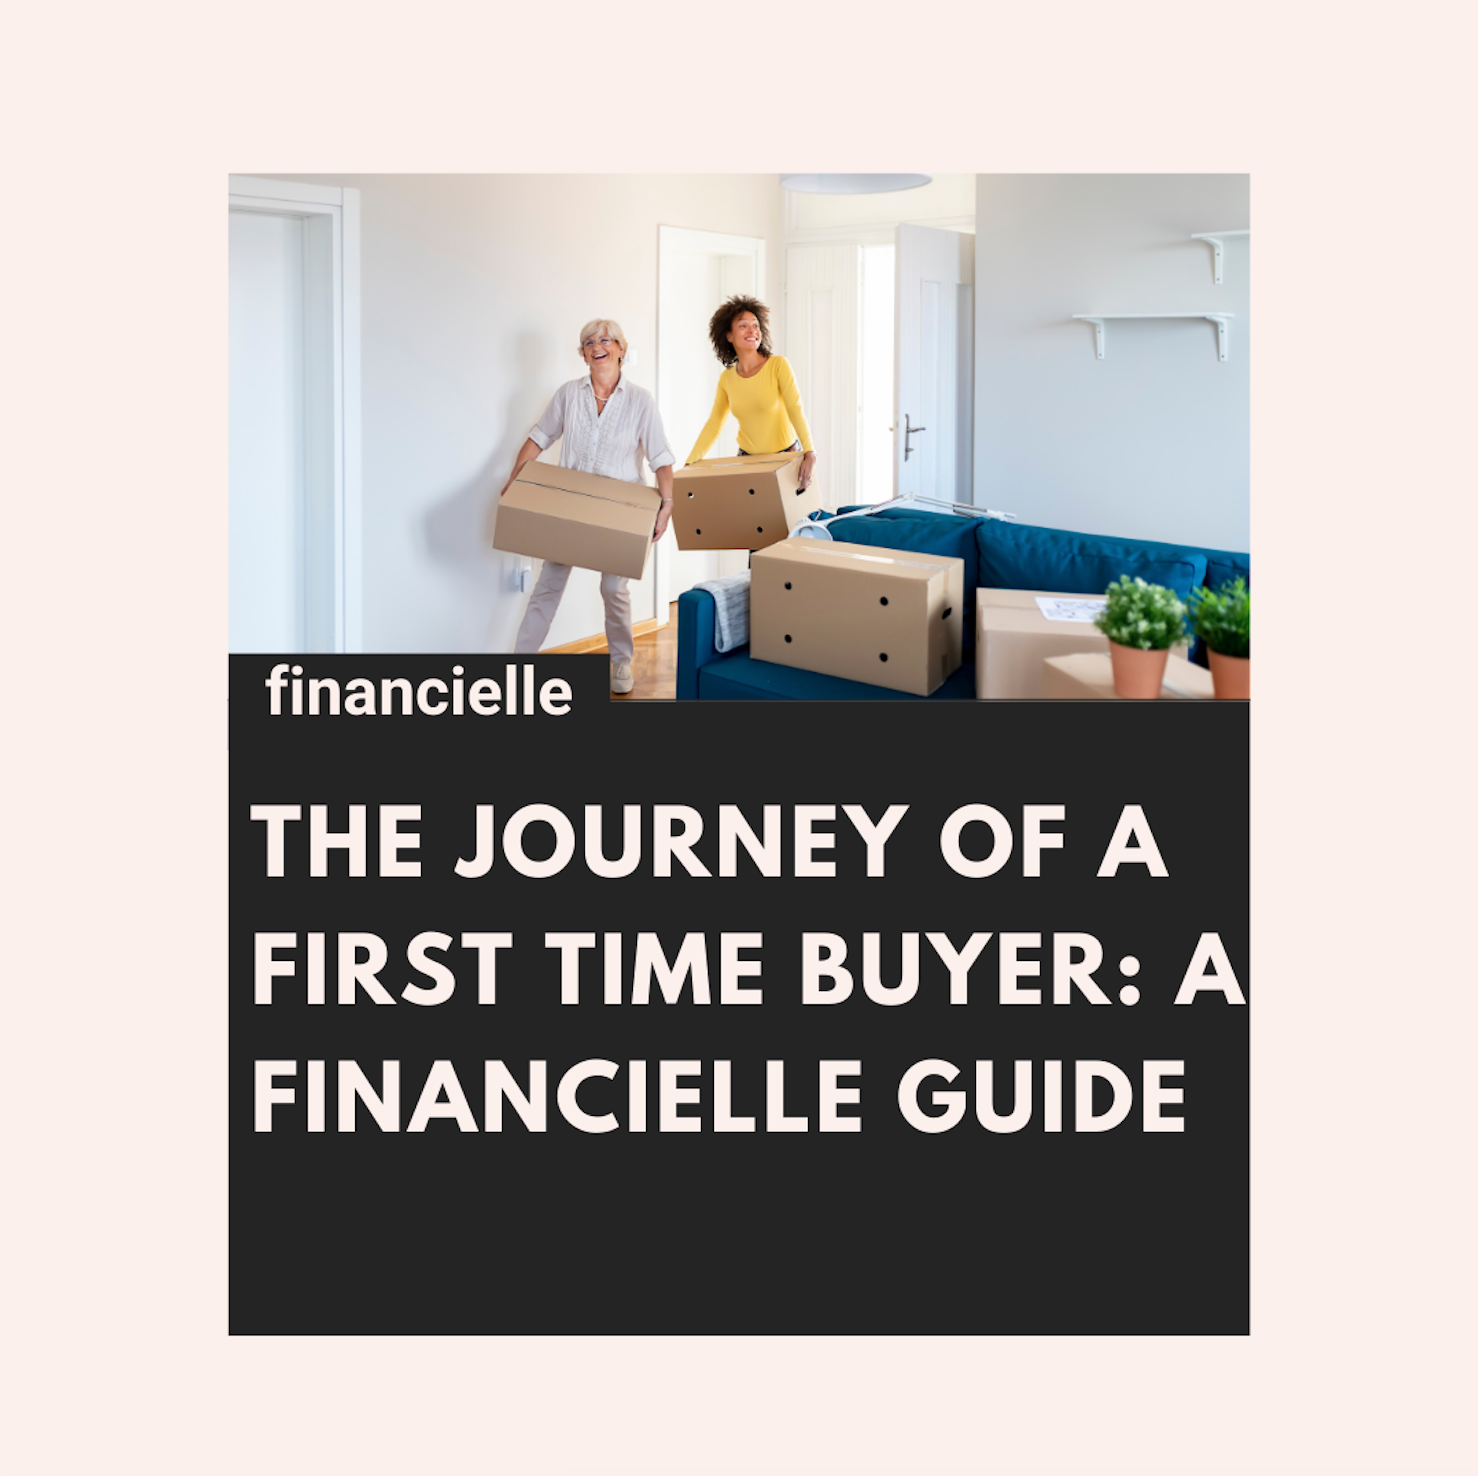 The journey of a first time buyer guide